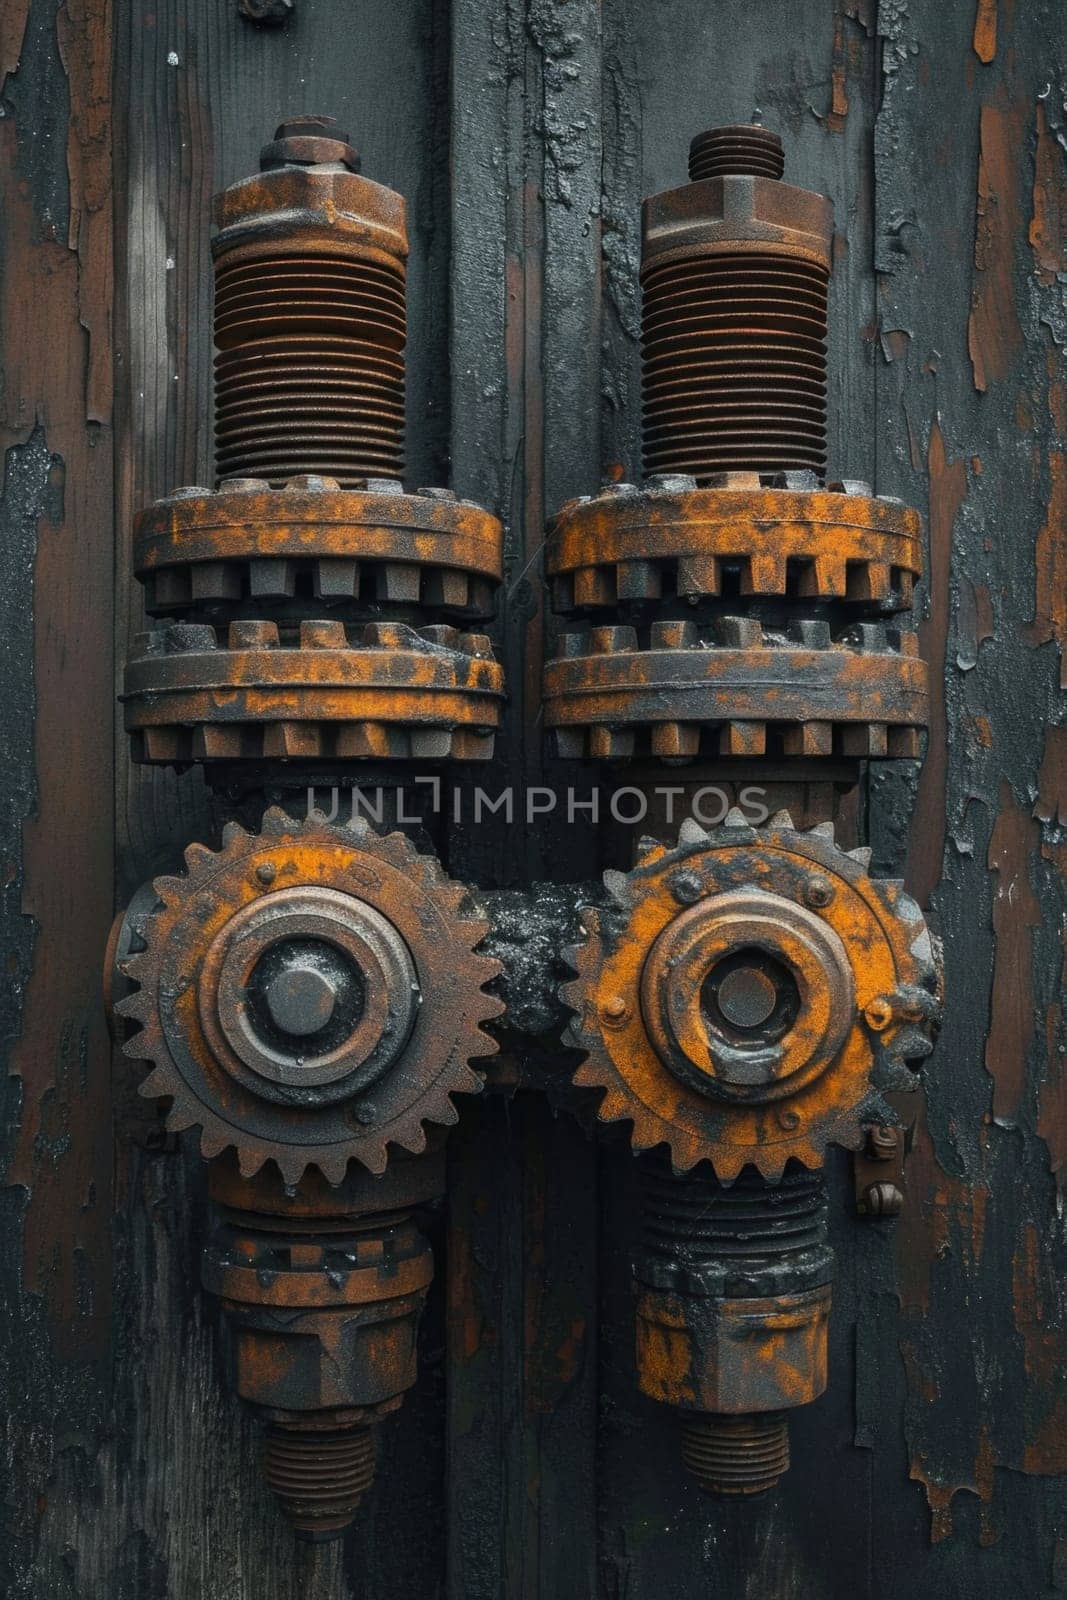 Details The gear is made of metal. Mechanical gears made of steel.